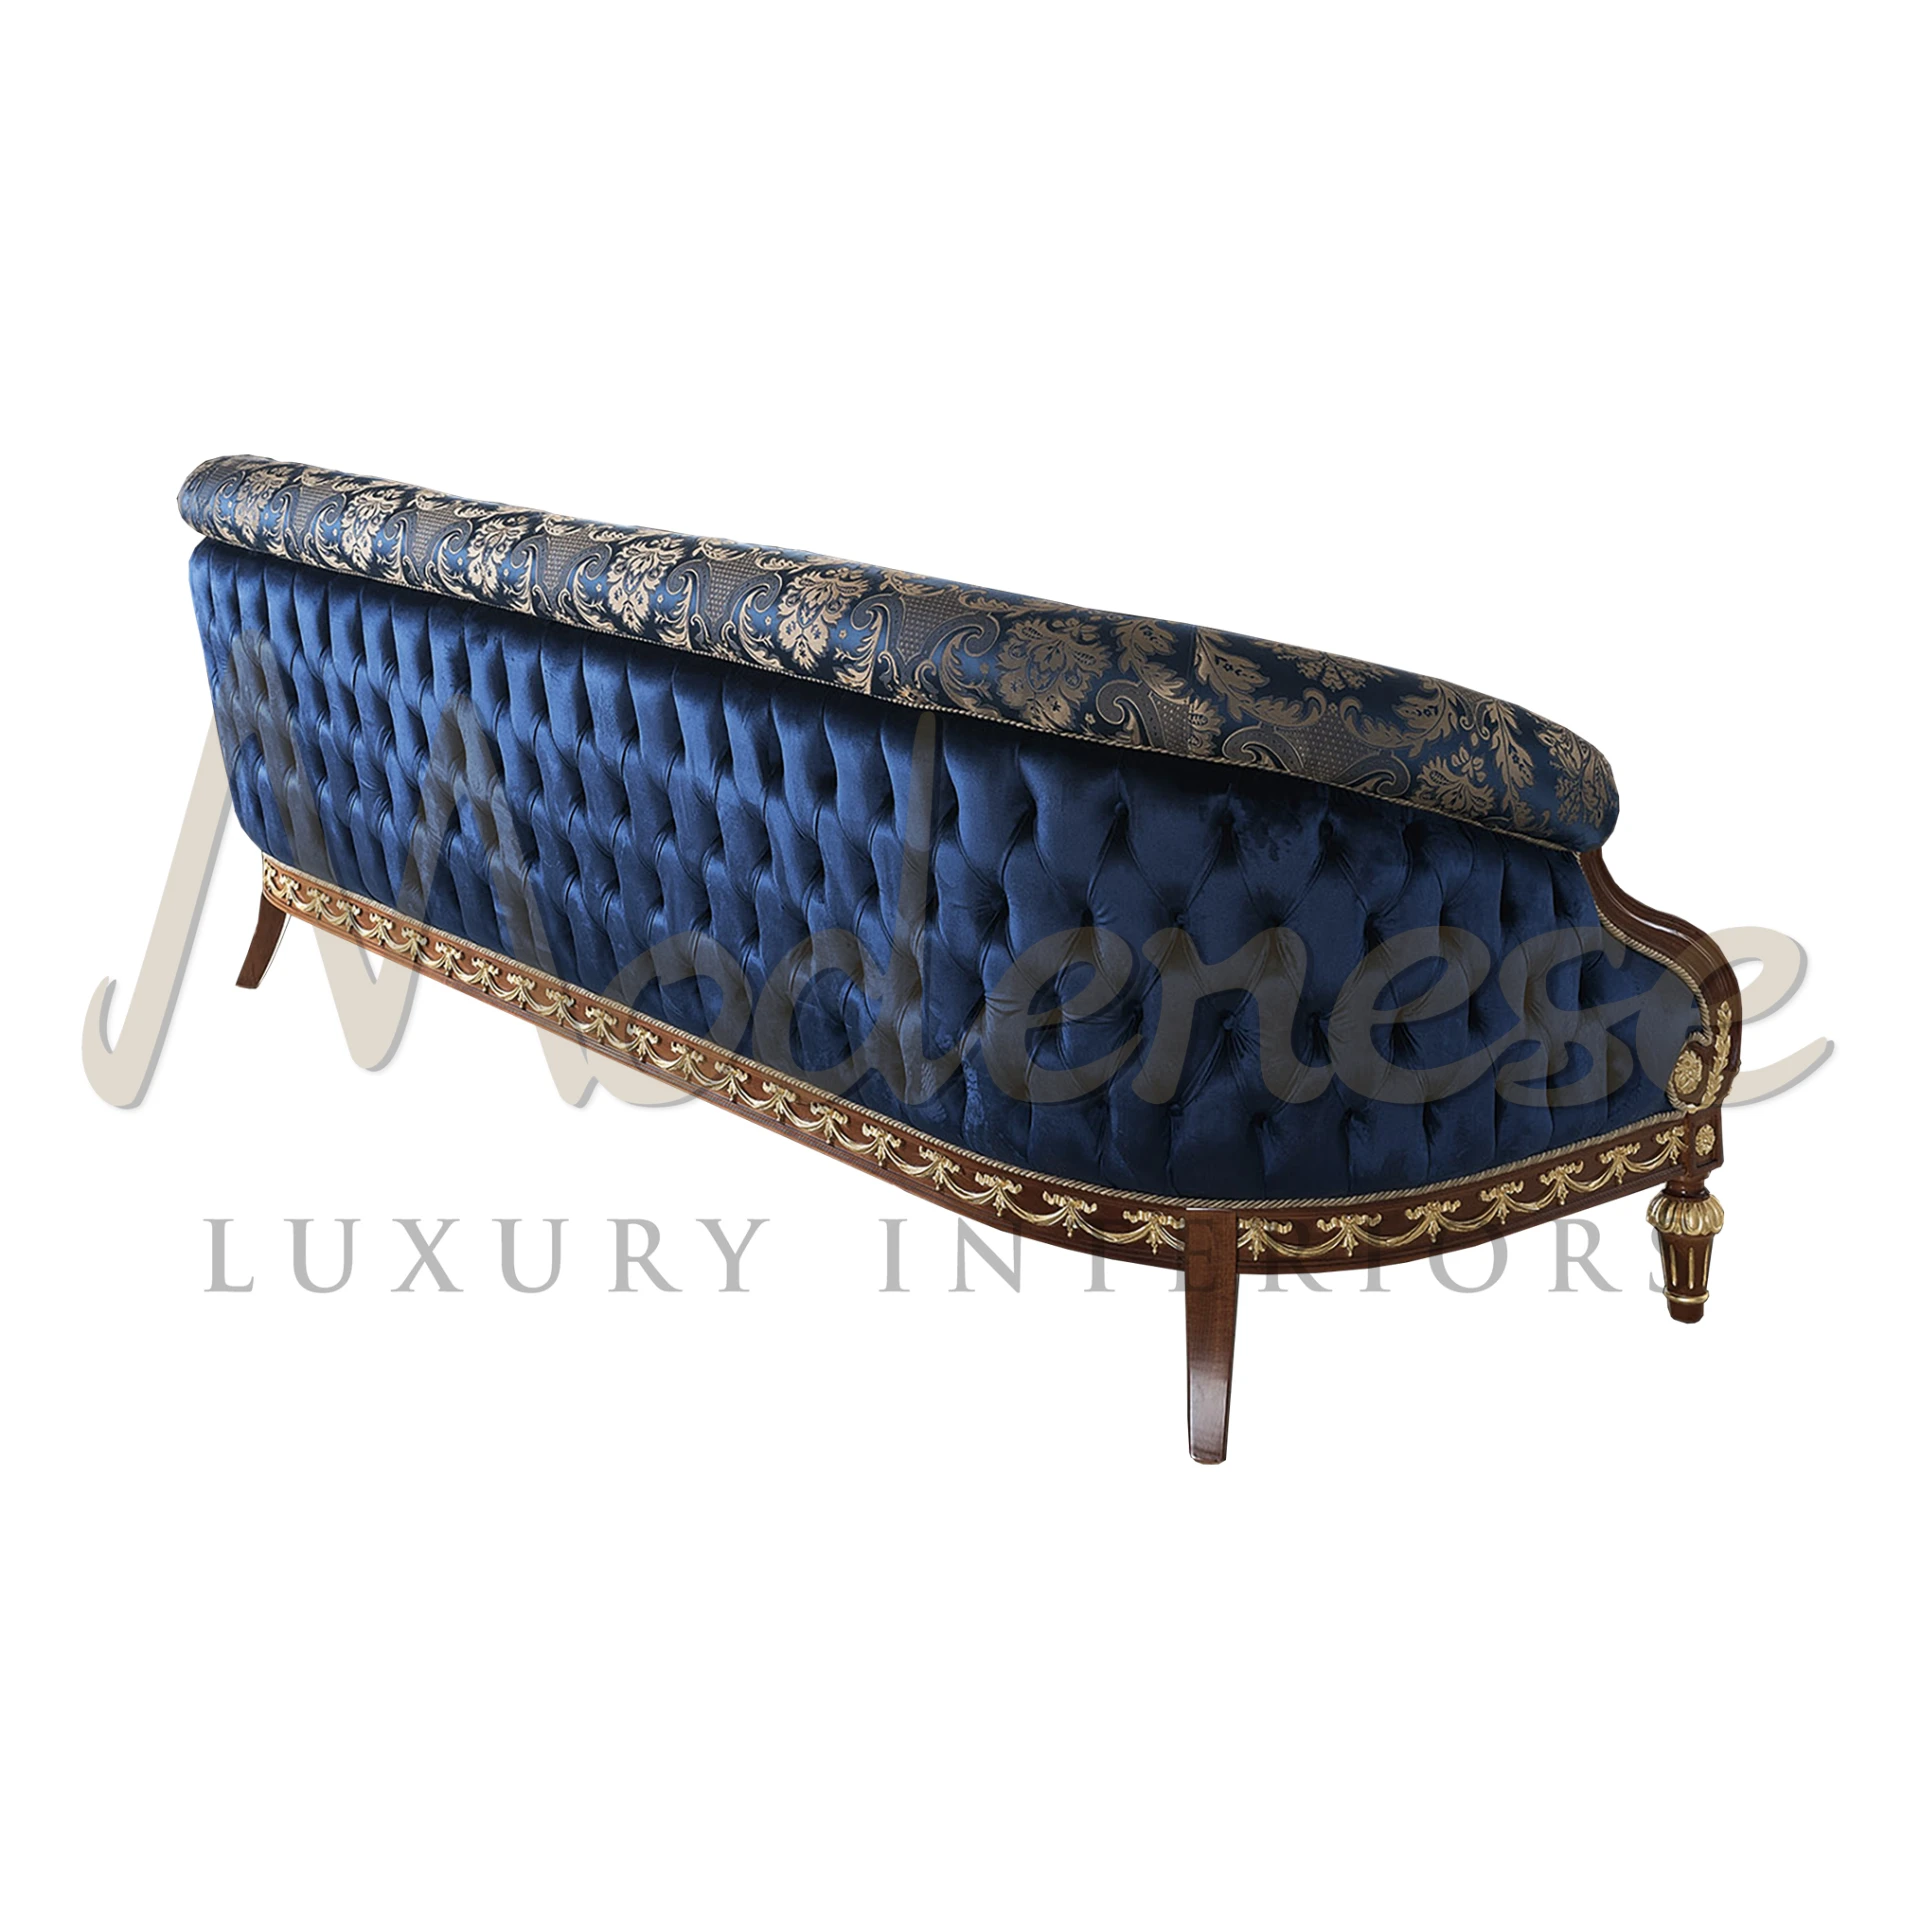 A lavish sofa by Modenese Luxury Furniture, featuring intricate detailing and plush upholstery, perfect for upscale interiors.